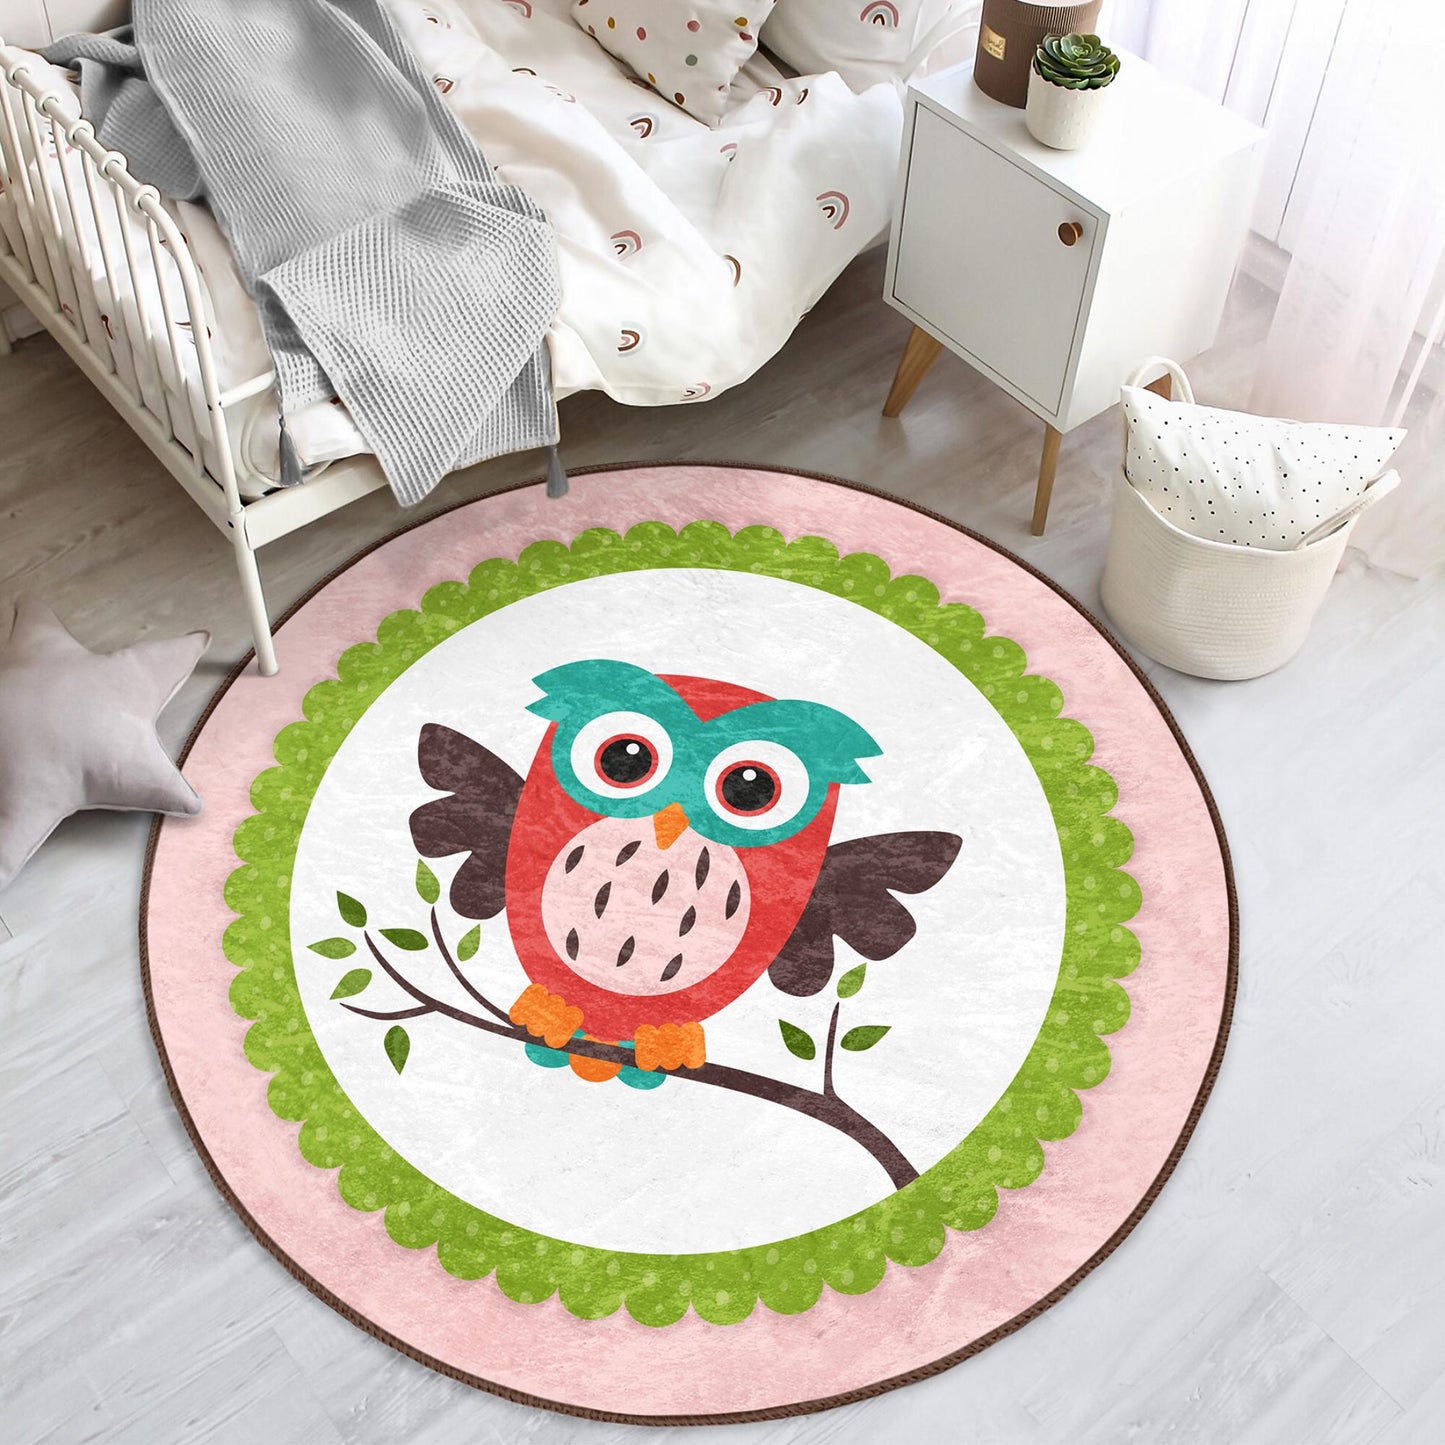 Fun-filled rug featuring adorable baby owls for nursery ambiance.